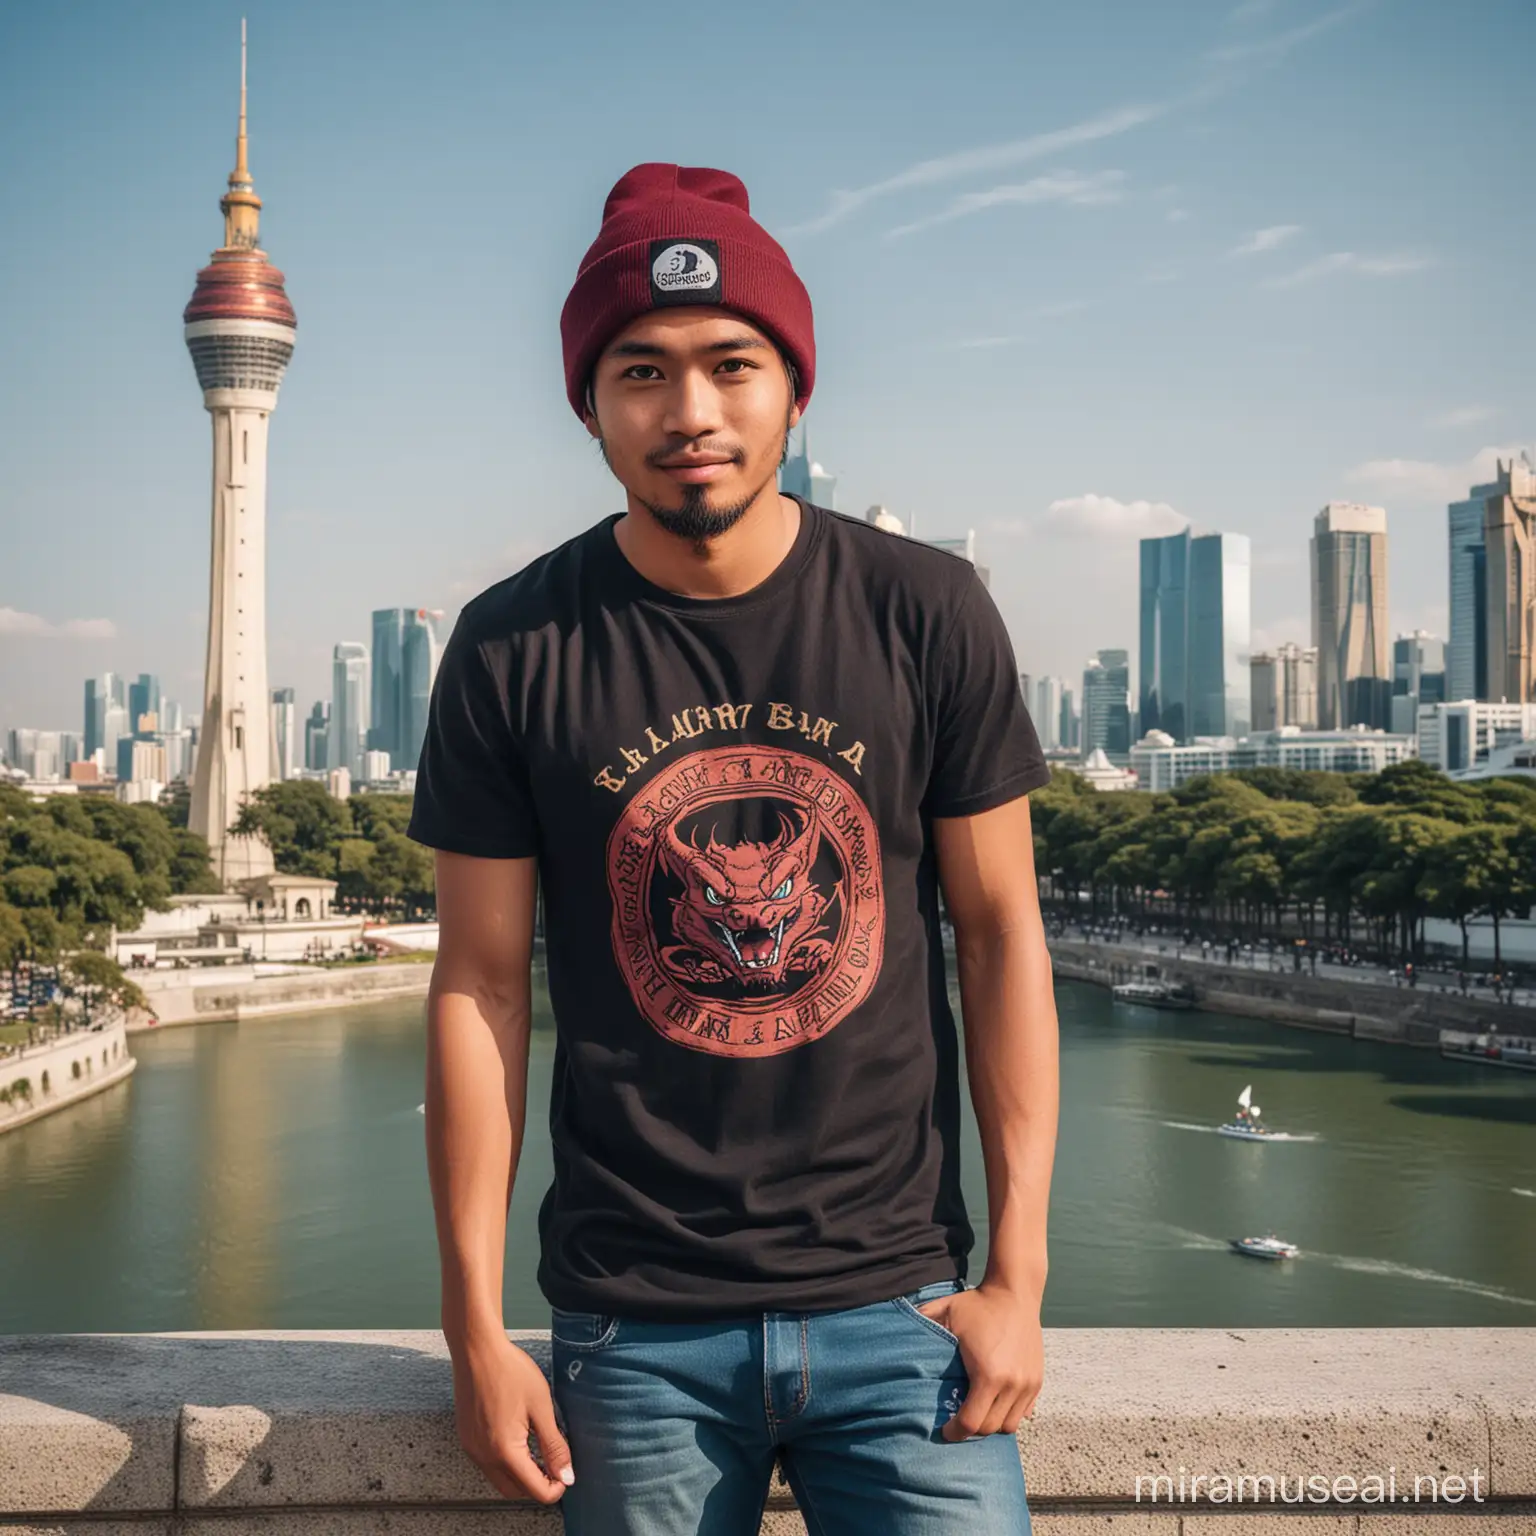 Portrait of Smiling Indonesian Man in Dragon Ball TShirt at Monas Tower